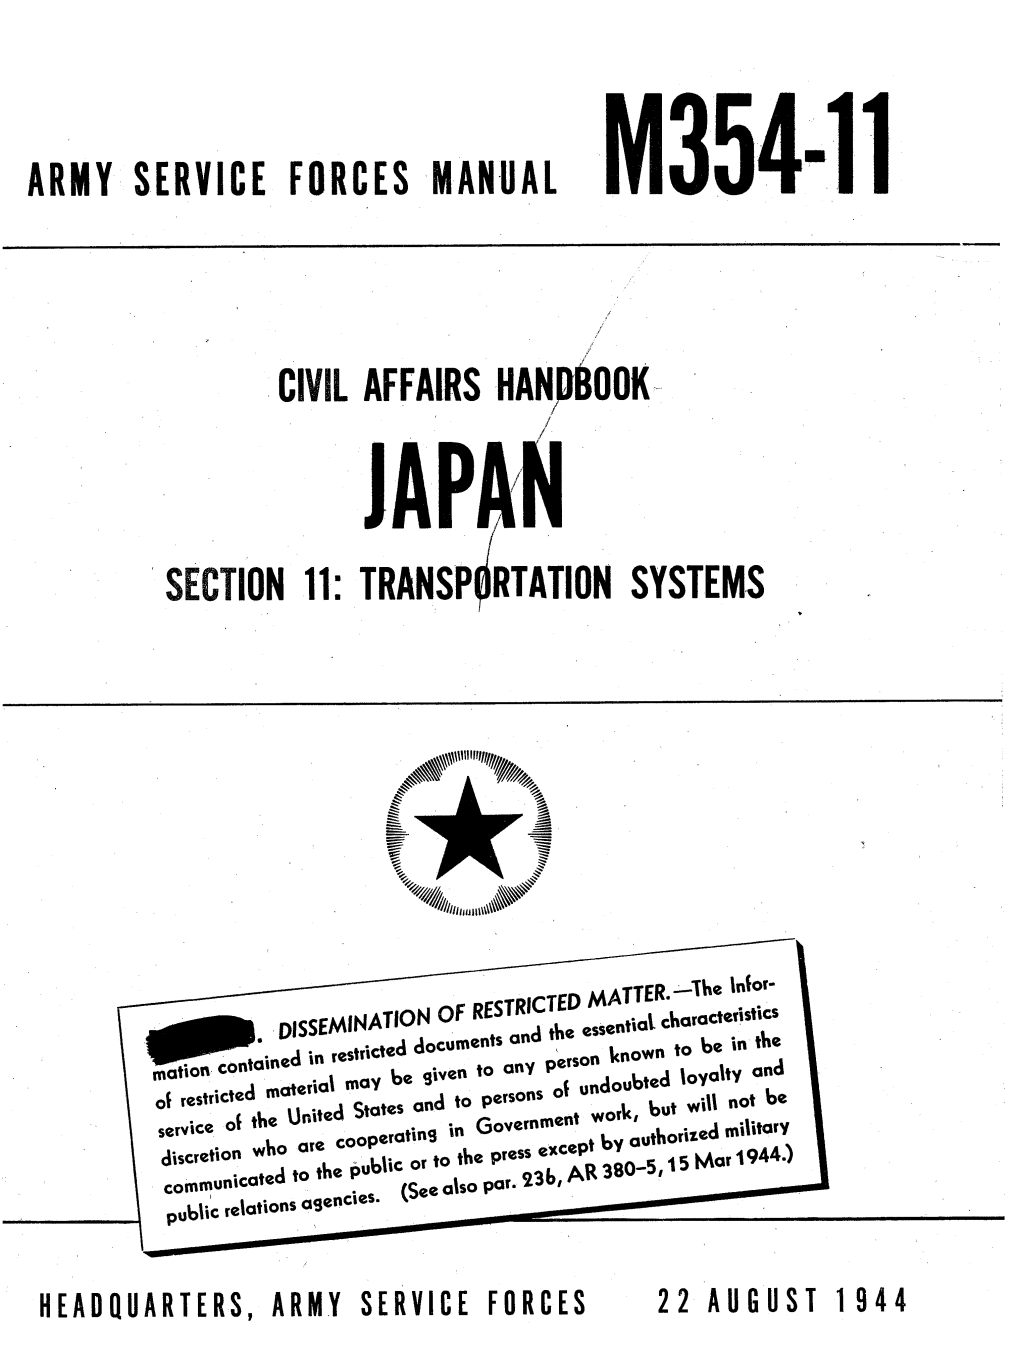 Army Service Forces Manual M 35